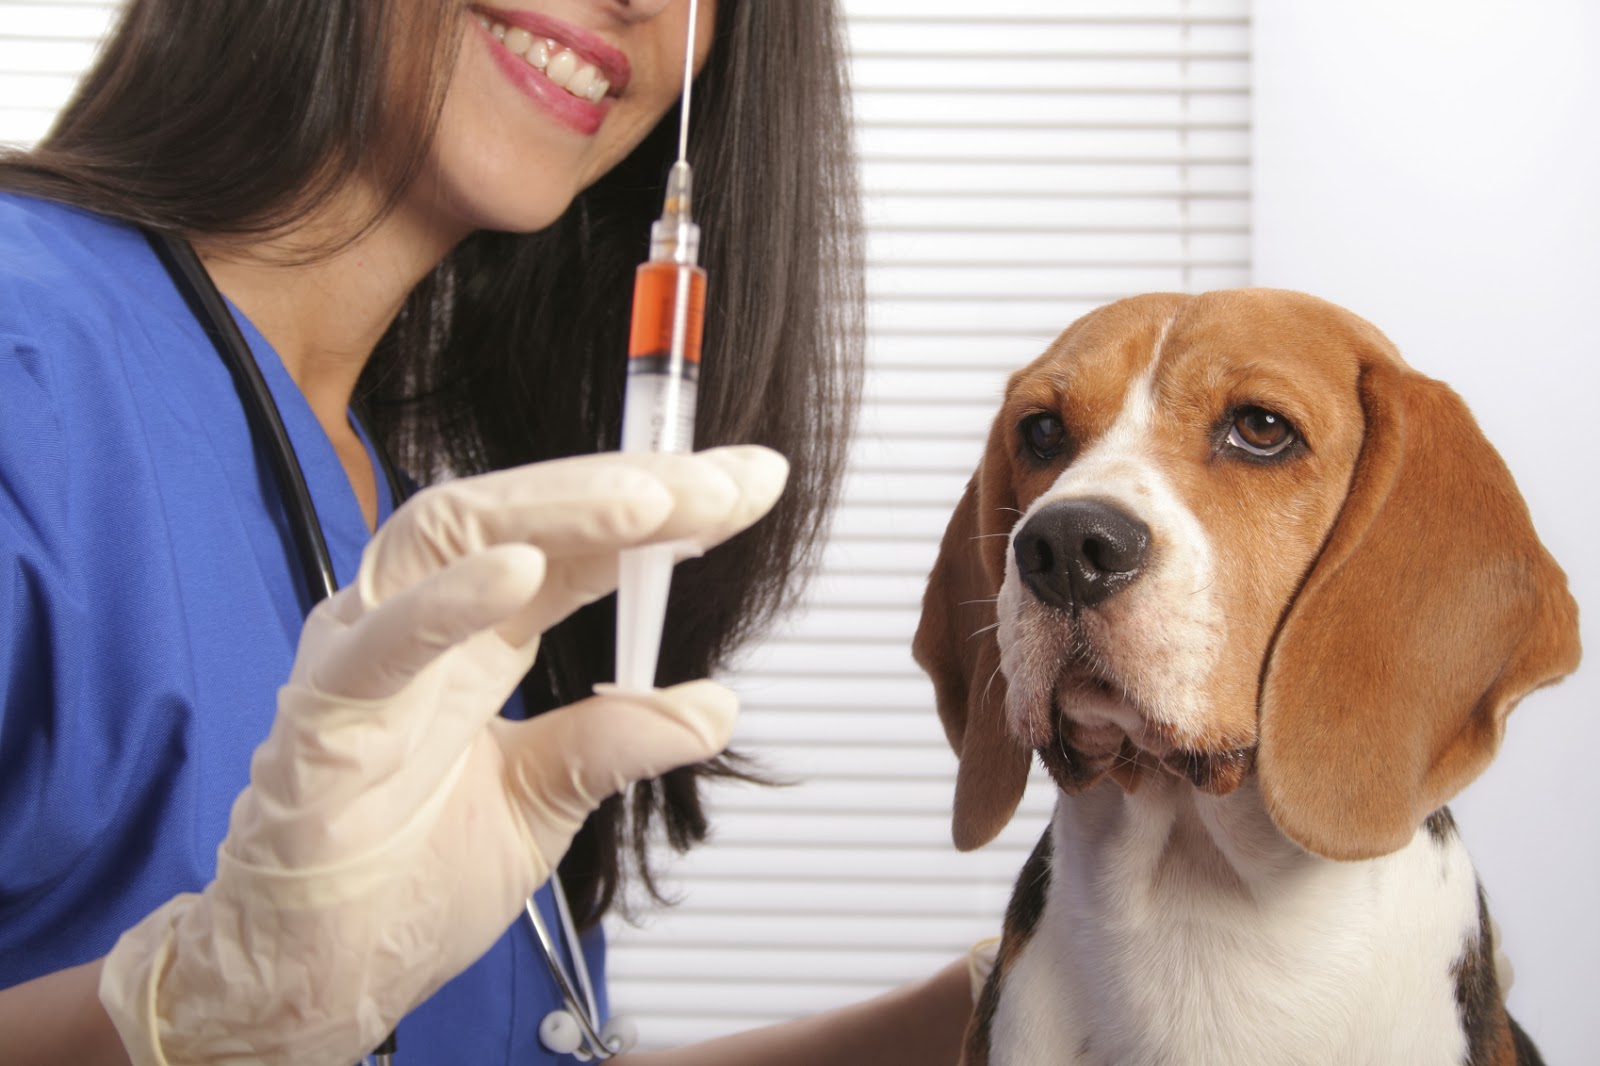 Veterinarian doctor with syringe and cute dog looking.  Focus is on the dog.